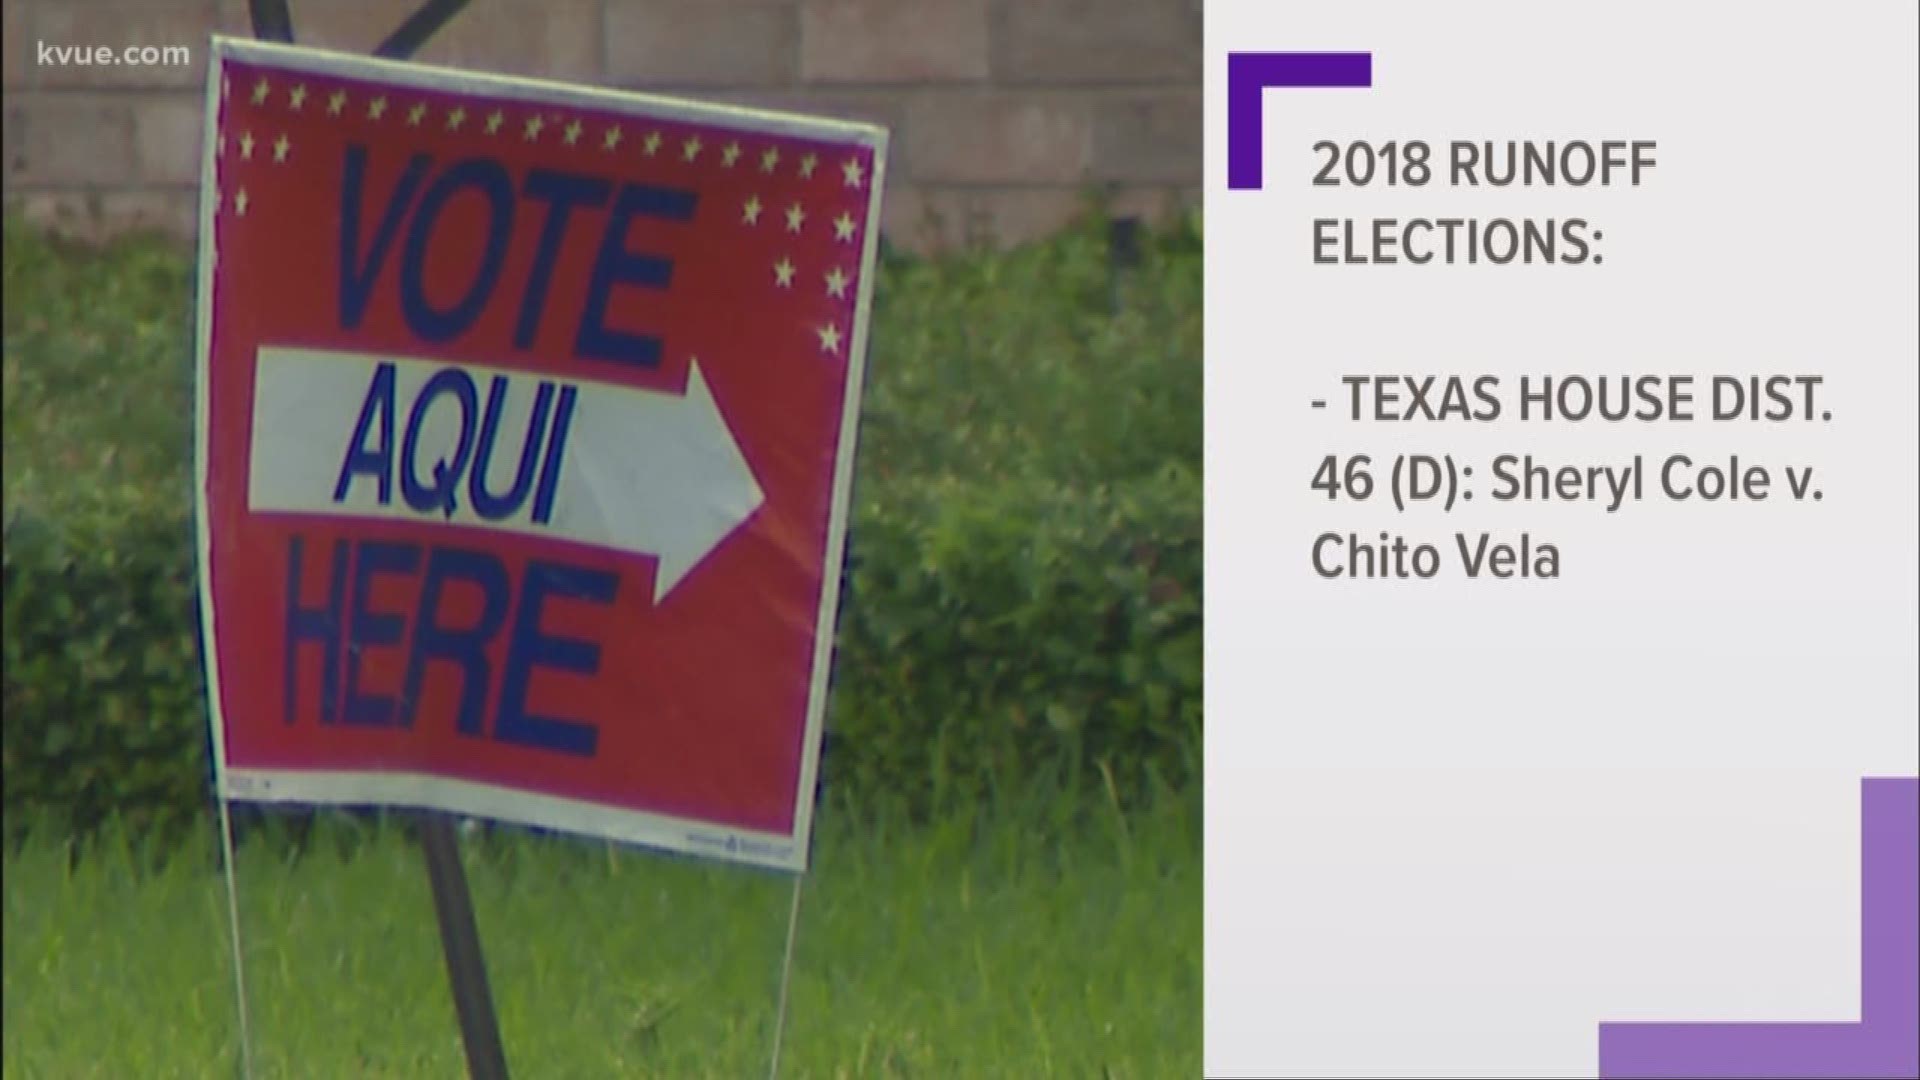 Tuesday is Election Day for the 2018 Texas Primary Run-Off.